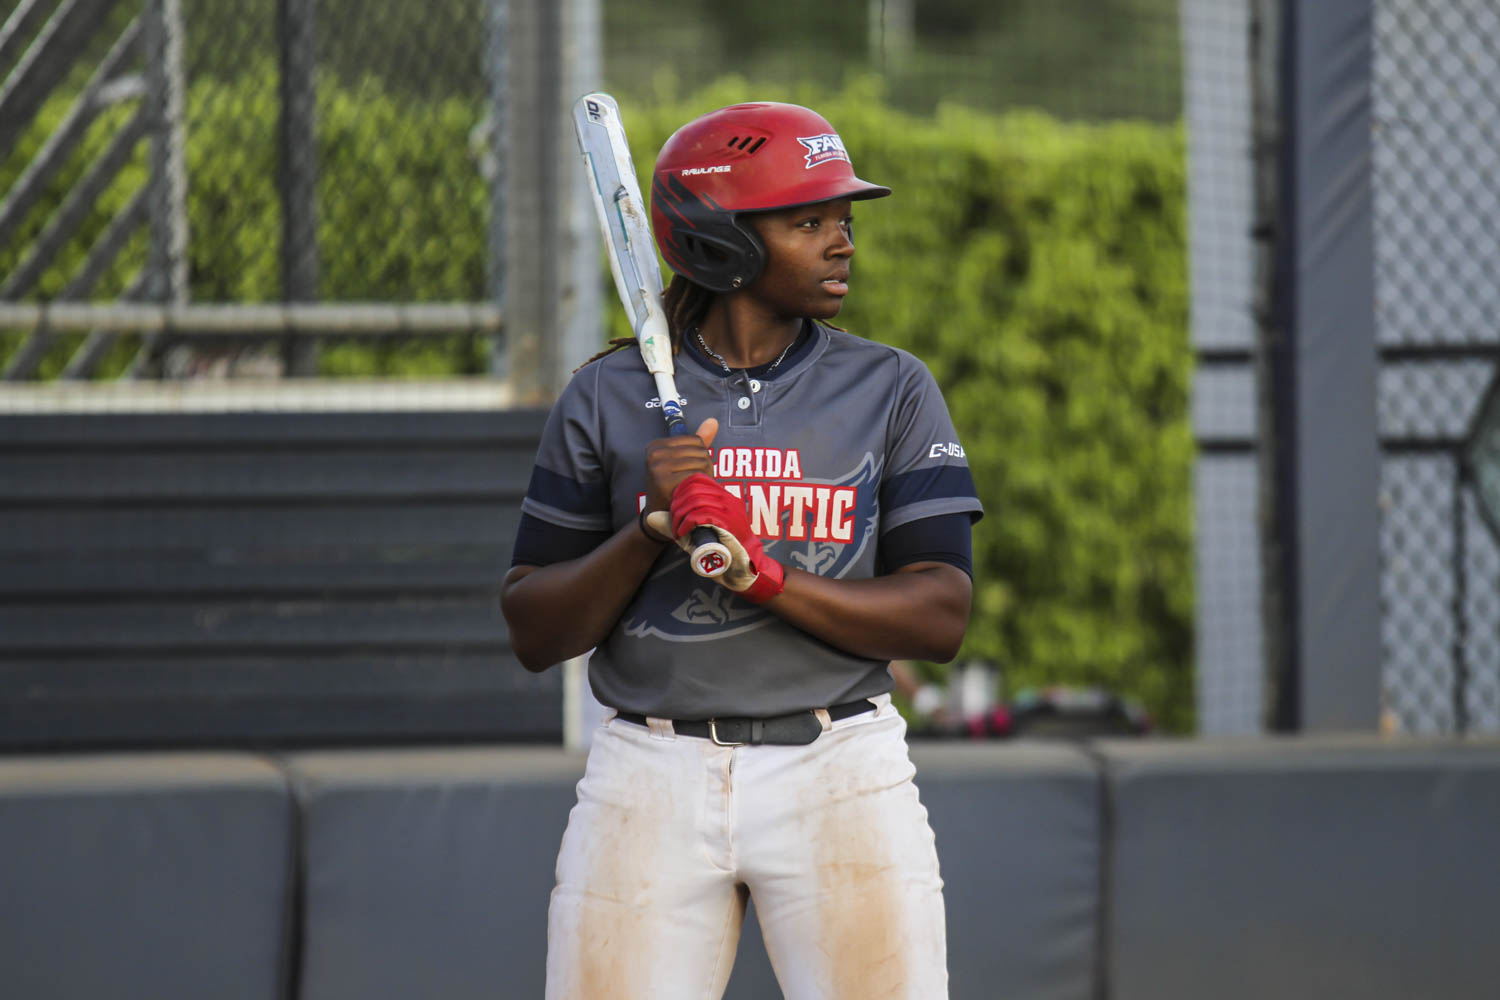 Emily+Lochten+leads+FAU+with+16+home+runs+%0Aand+35+RBIs.+Photo+by+Alexander+Rodriguez